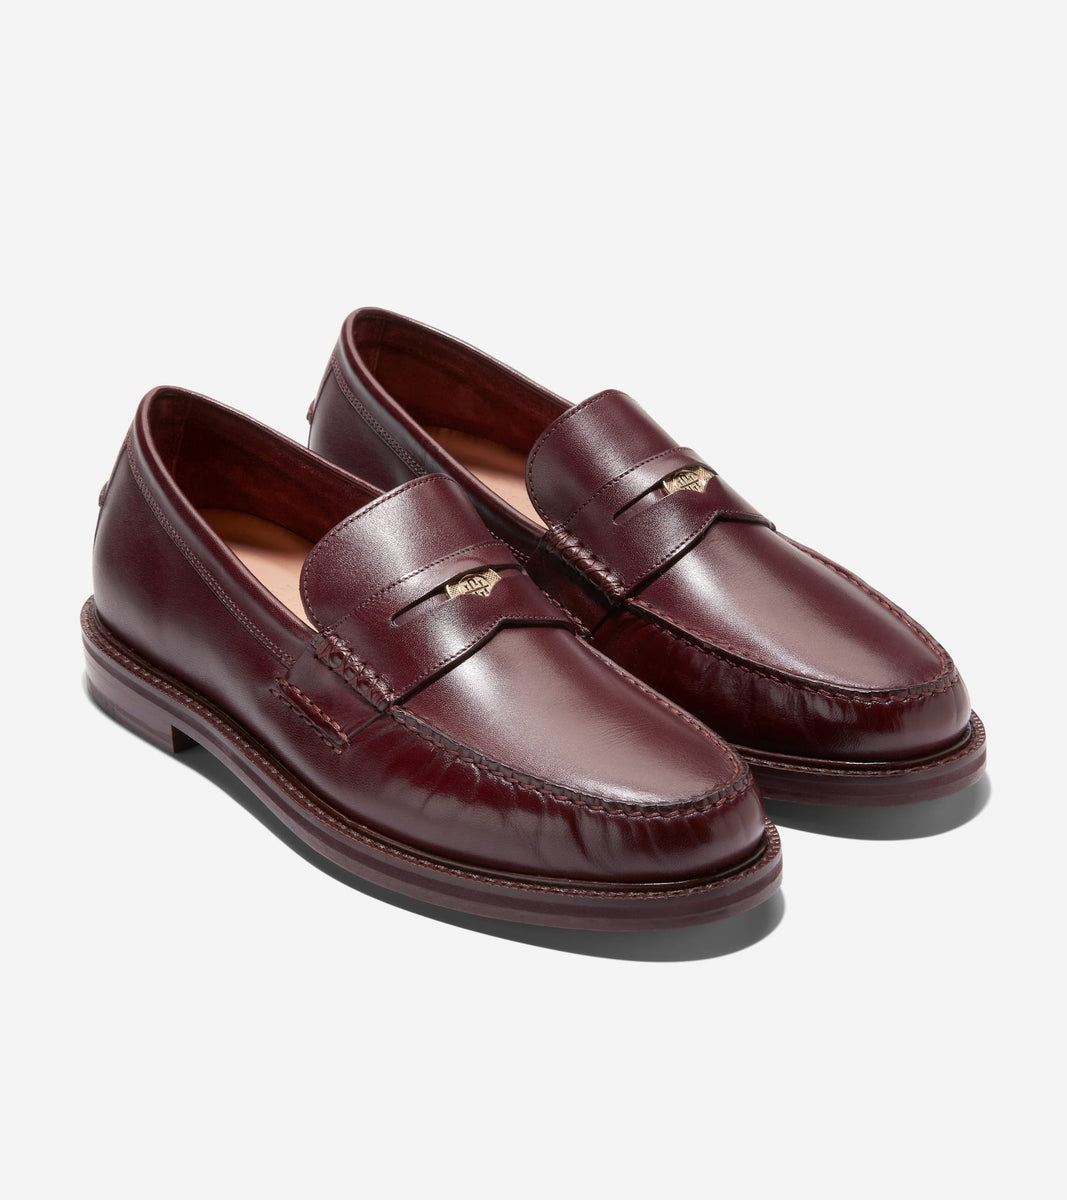 American Classics Pinch Penny Loafer – Cole Haan Philippines